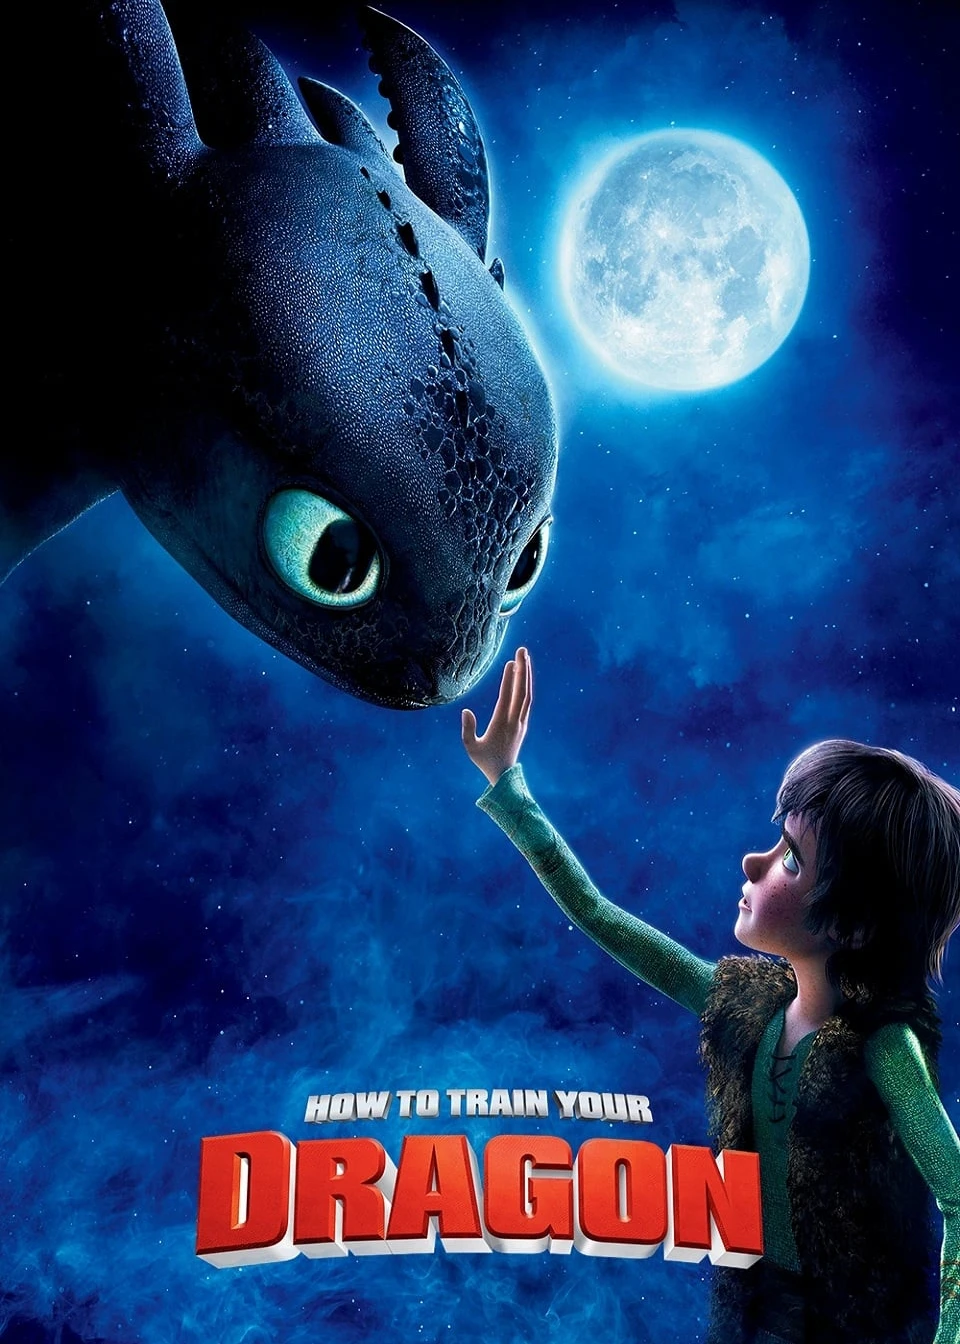 How to Train Your Dragon | How to Train Your Dragon (2010)